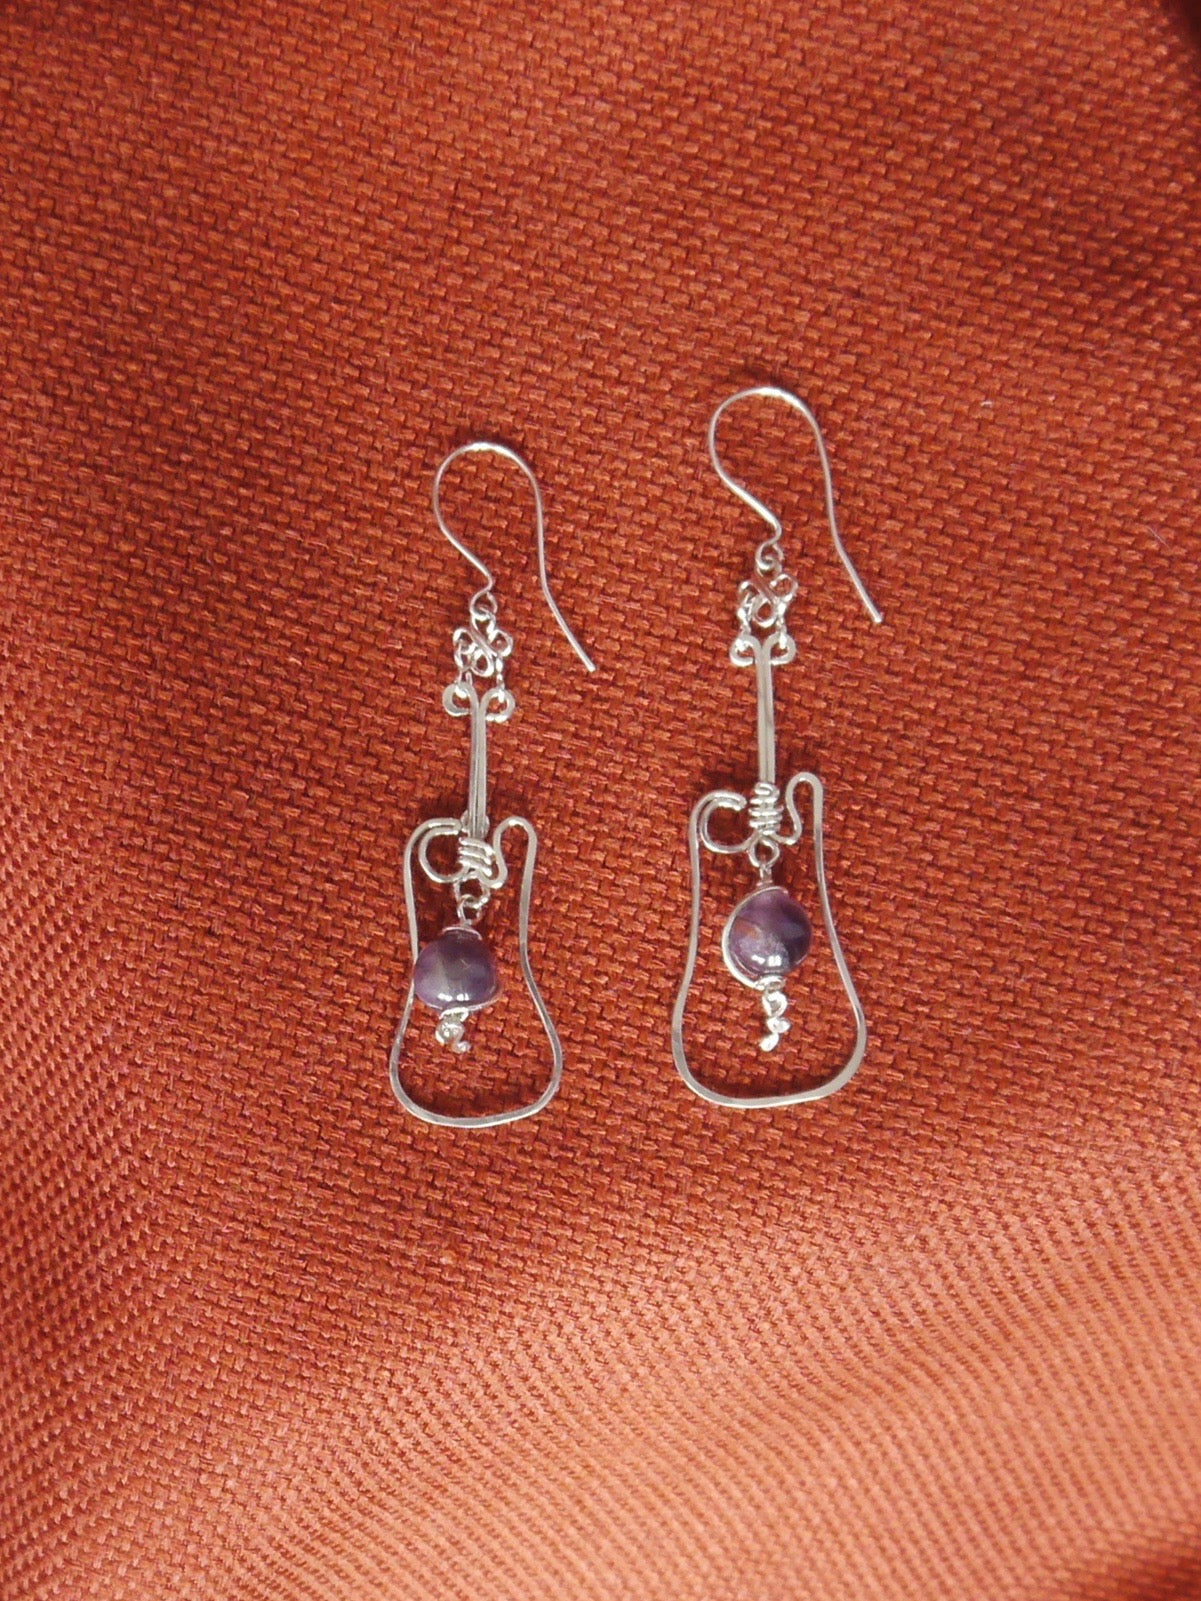 Earrings to Unwind and Stay Calm